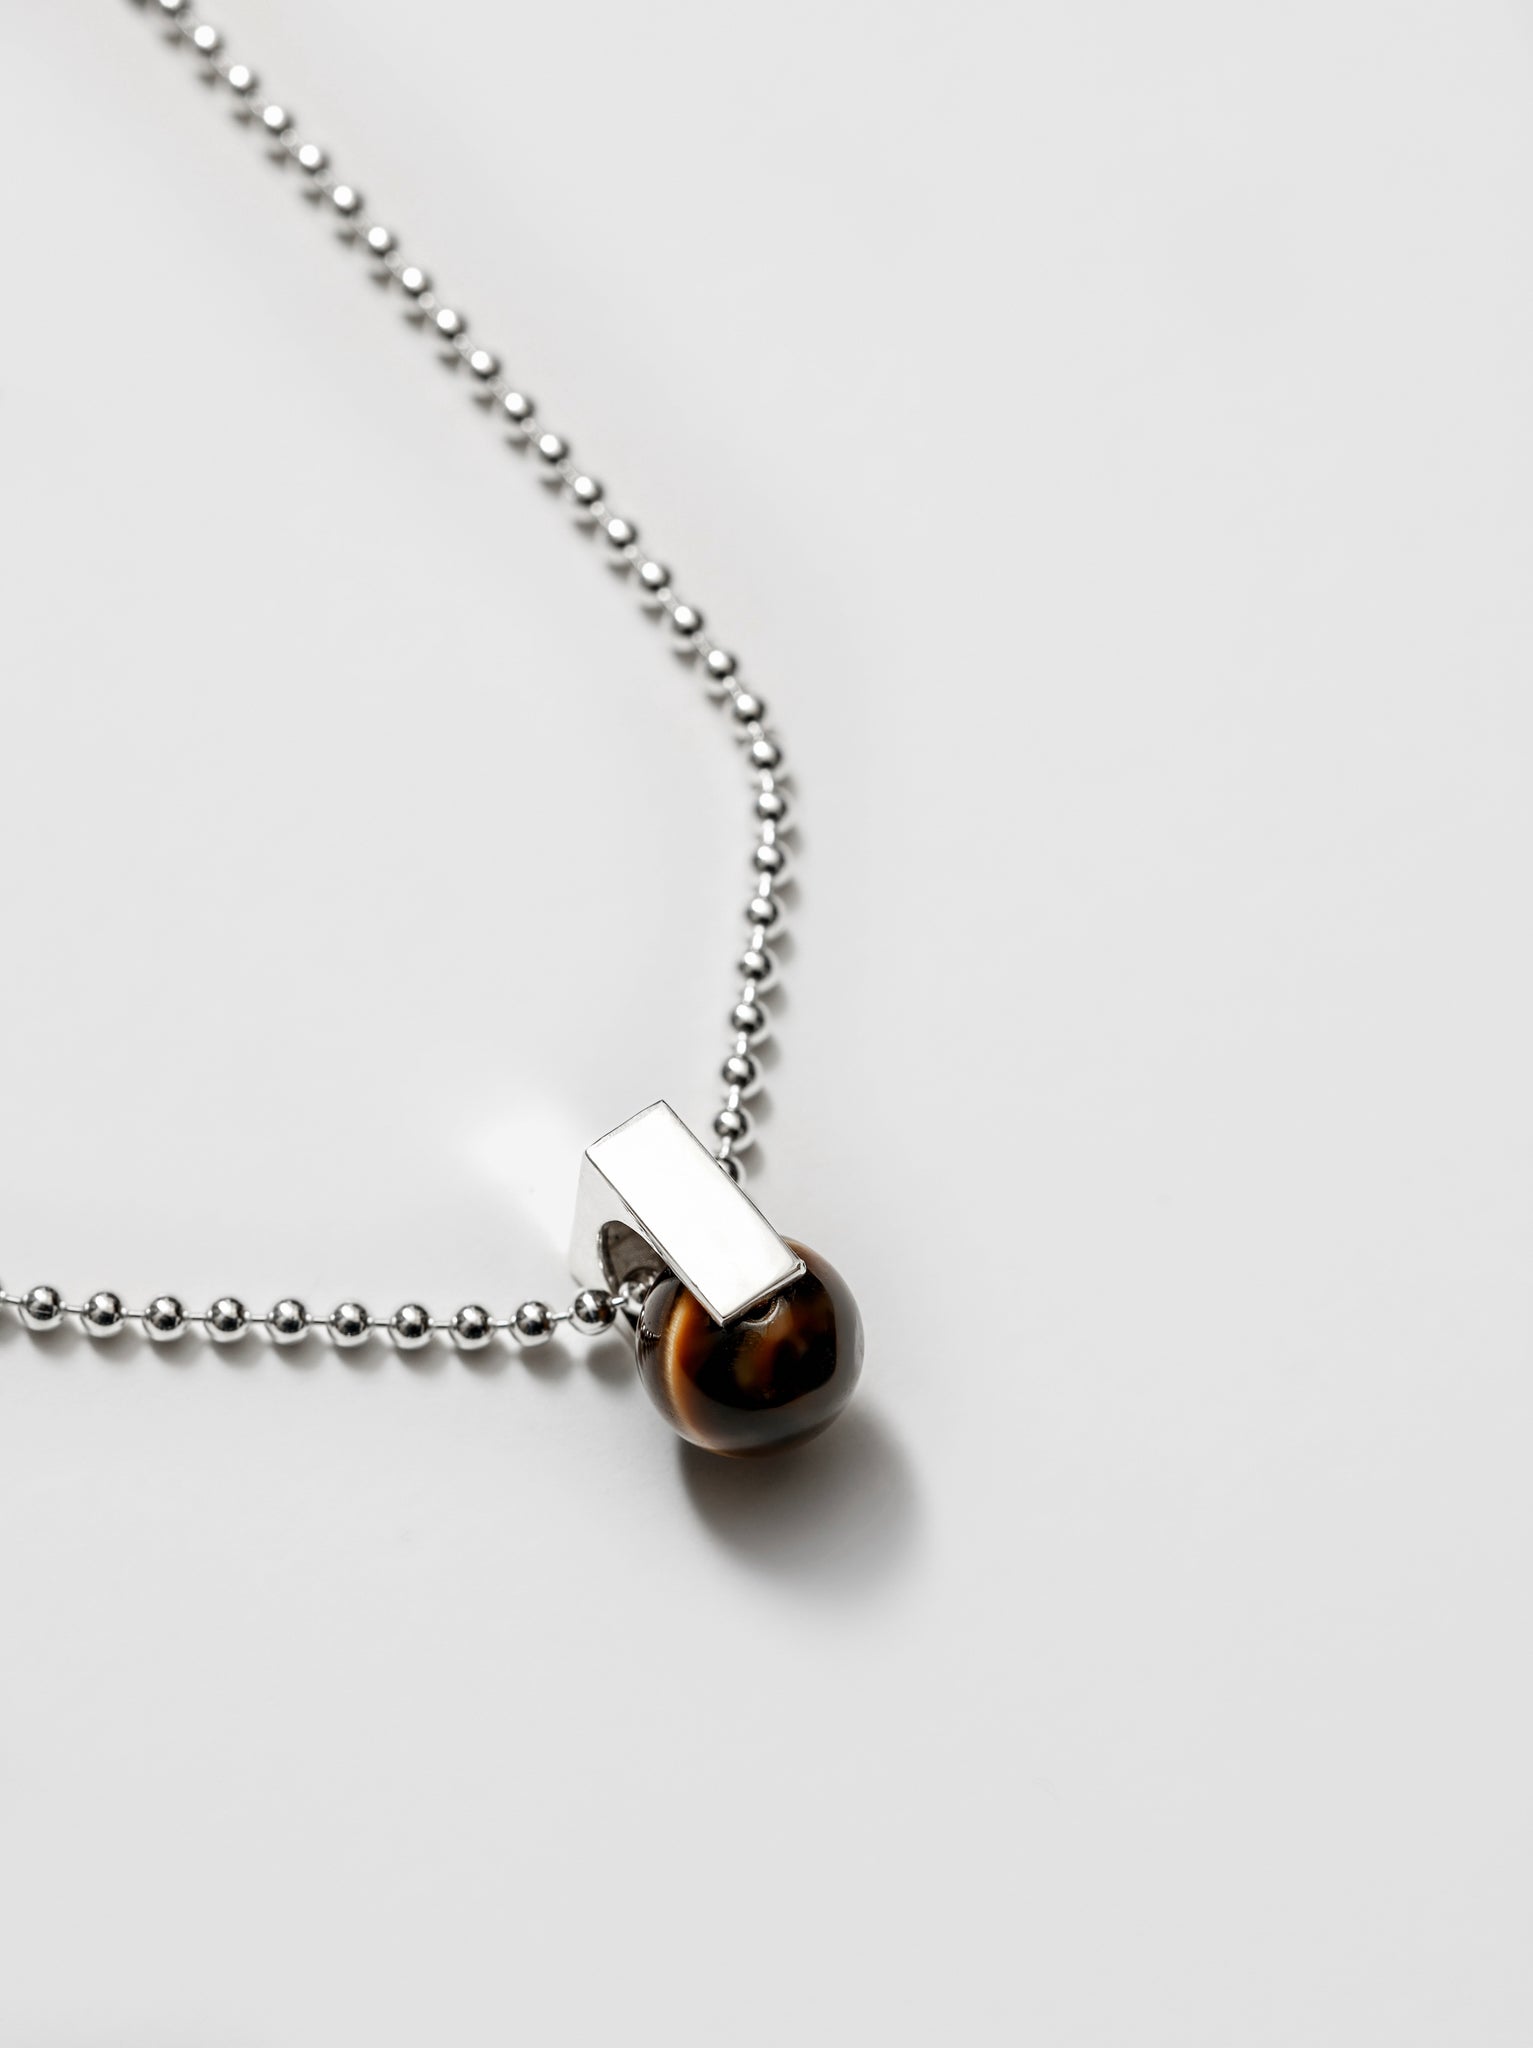 Wolf Circus Ball Chain Necklace w/ Tiger's Eye Bead Sterling Silver | Axel Necklace-Necklaces-wolfcircus.com